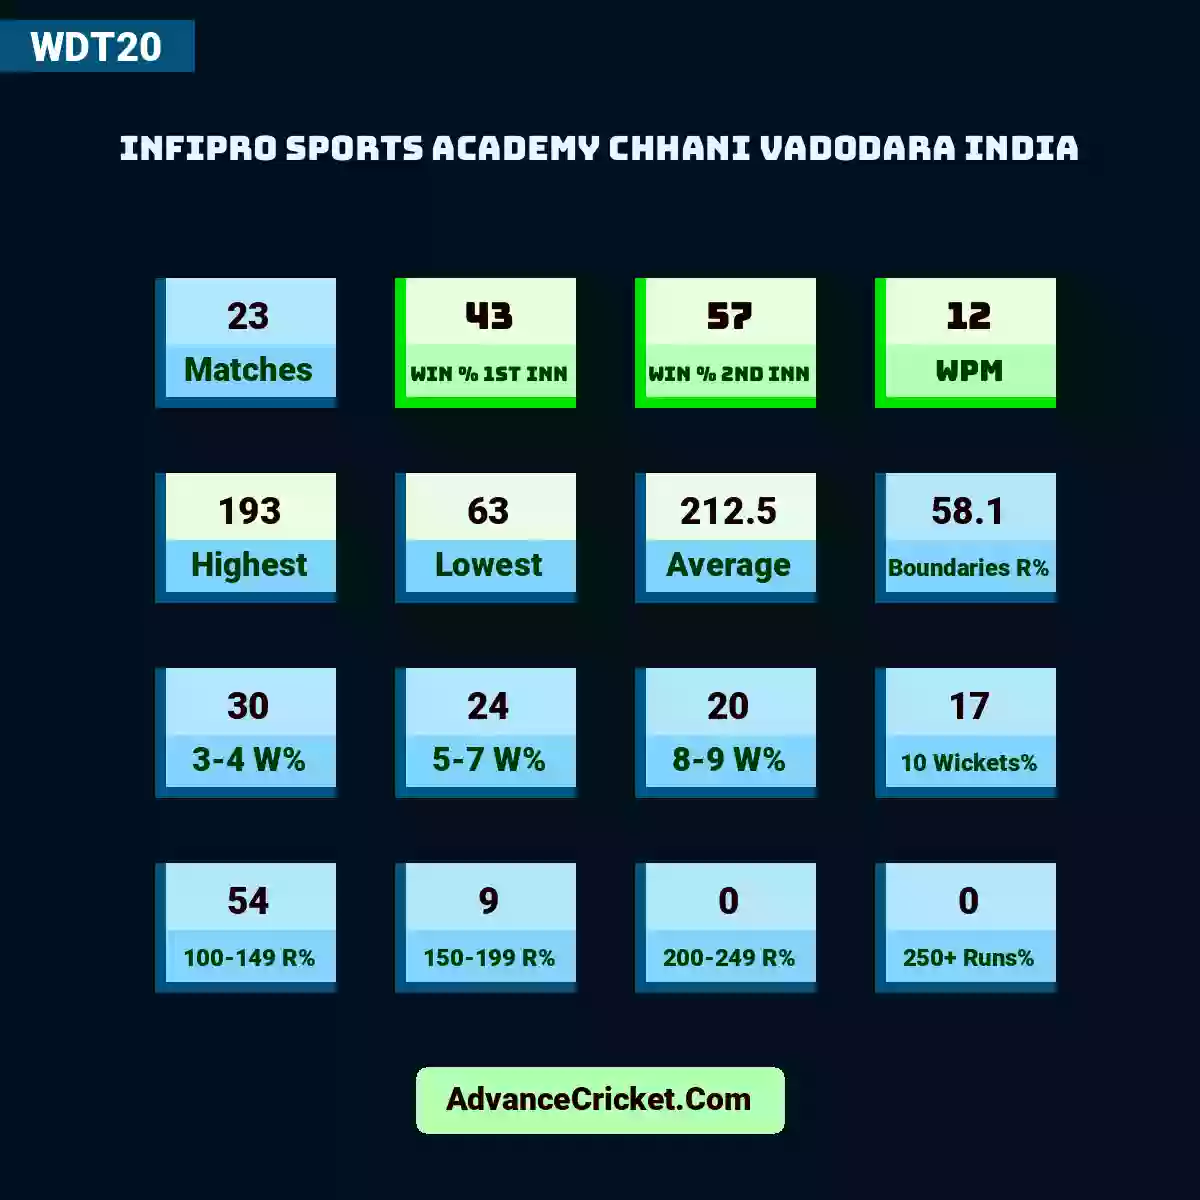 Image showing Infipro Sports Academy Chhani Vadodara India with Matches: 23, Win % 1st Inn: 43, Win % 2nd Inn: 57, WPM: 12, Highest: 193, Lowest: 63, Average: 212.5, Boundaries R%: 58.1, 3-4 W%: 30, 5-7 W%: 24, 8-9 W%: 20, 10 Wickets%: 17, 100-149 R%: 54, 150-199 R%: 9, 200-249 R%: 0, 250+ Runs%: 0.